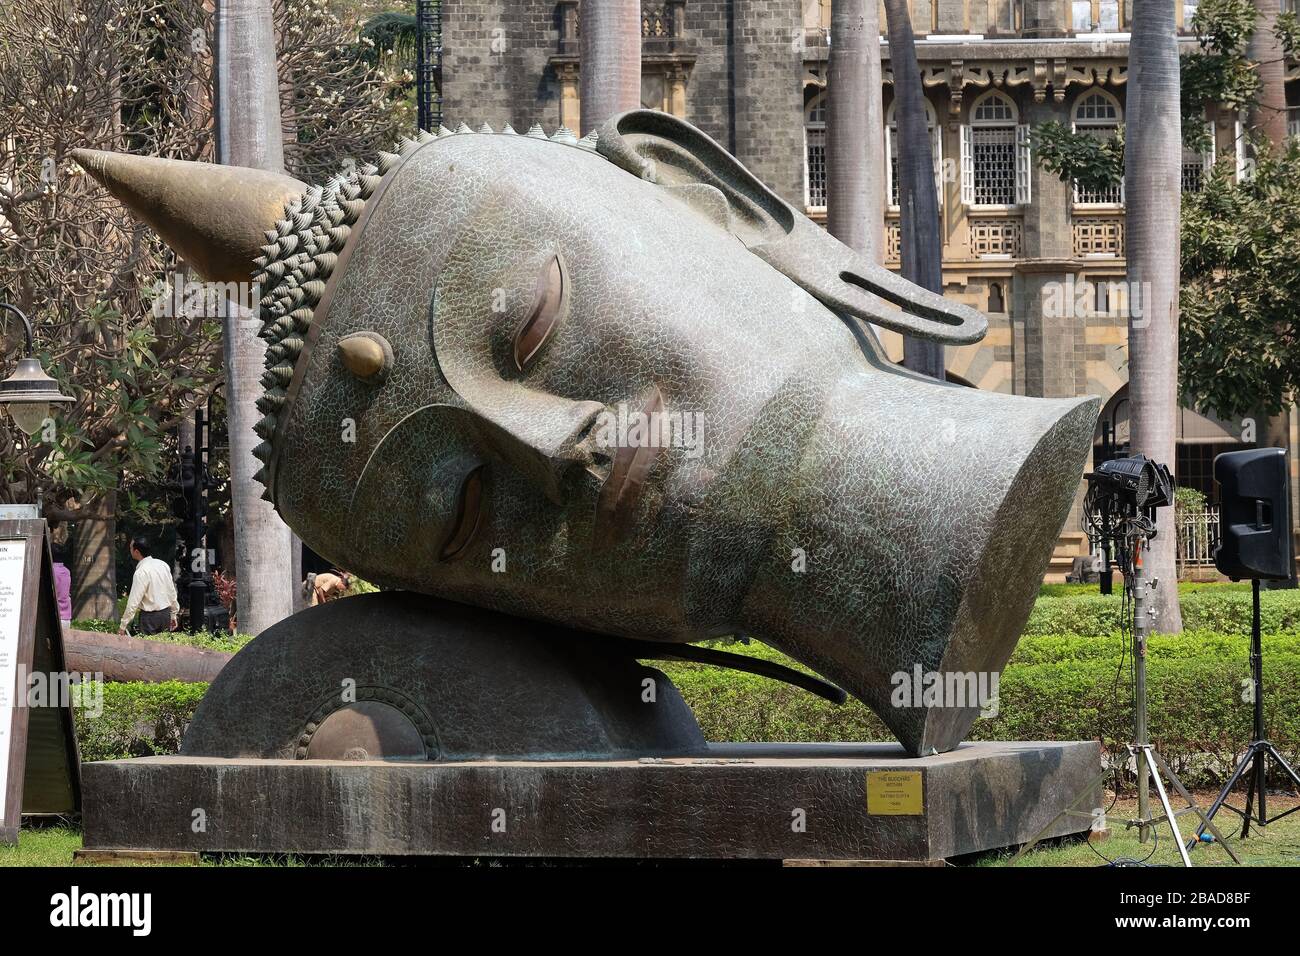 Statue of Buddhas head in the garden of the Prince of Wales Museum, now known as The Chhatrapati Shivaji Maharaj Museum in Mumbai, India Stock Photo